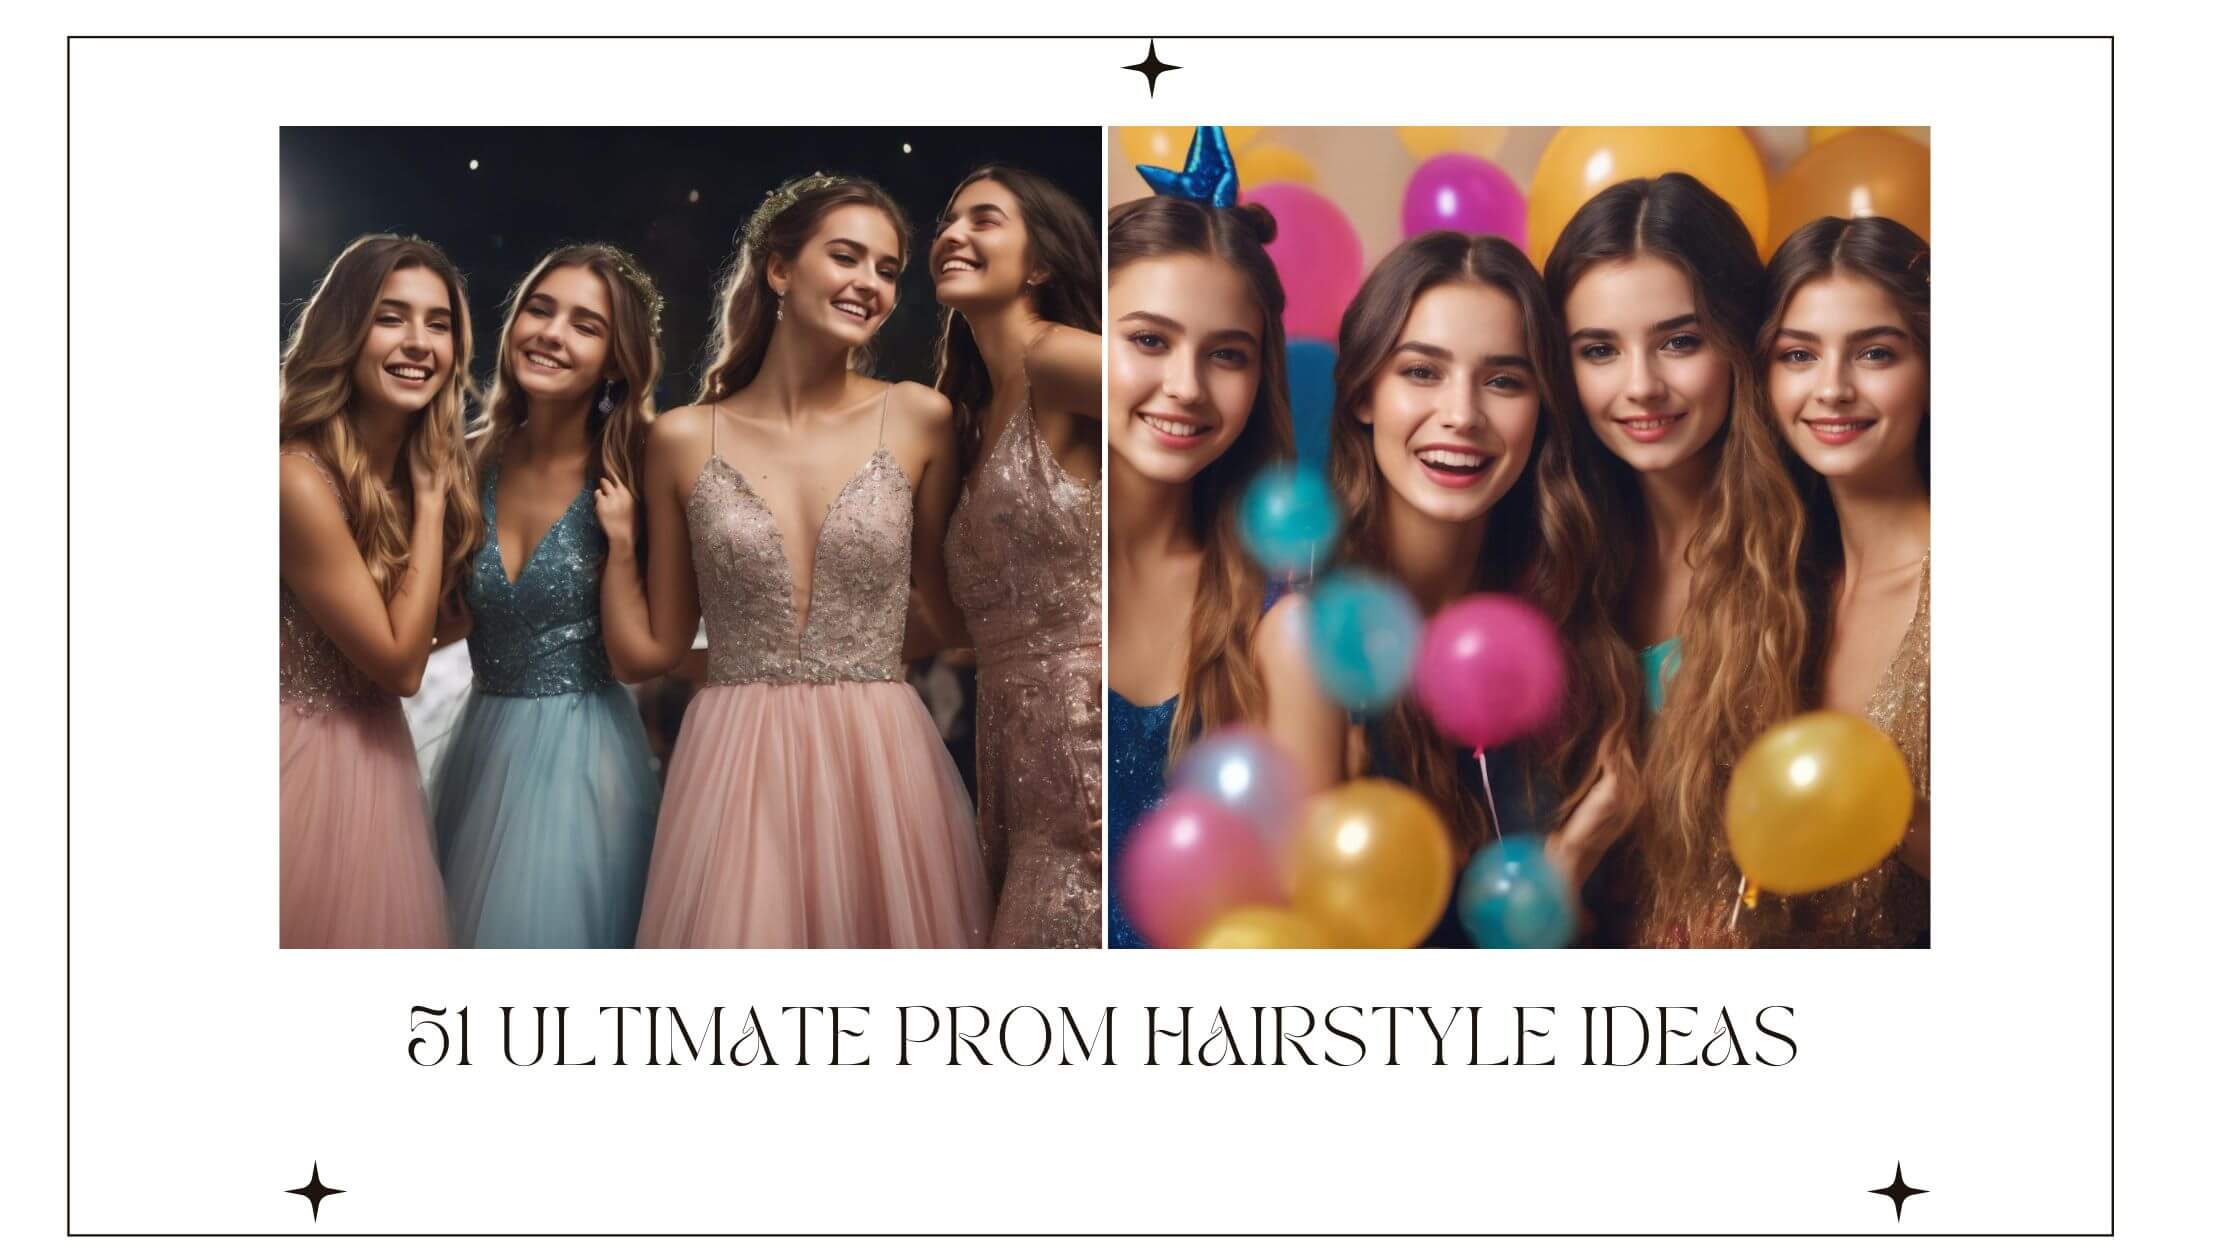 325 Cute Hairstyles Prom Black Girl Royalty-Free Photos and Stock Images |  Shutterstock